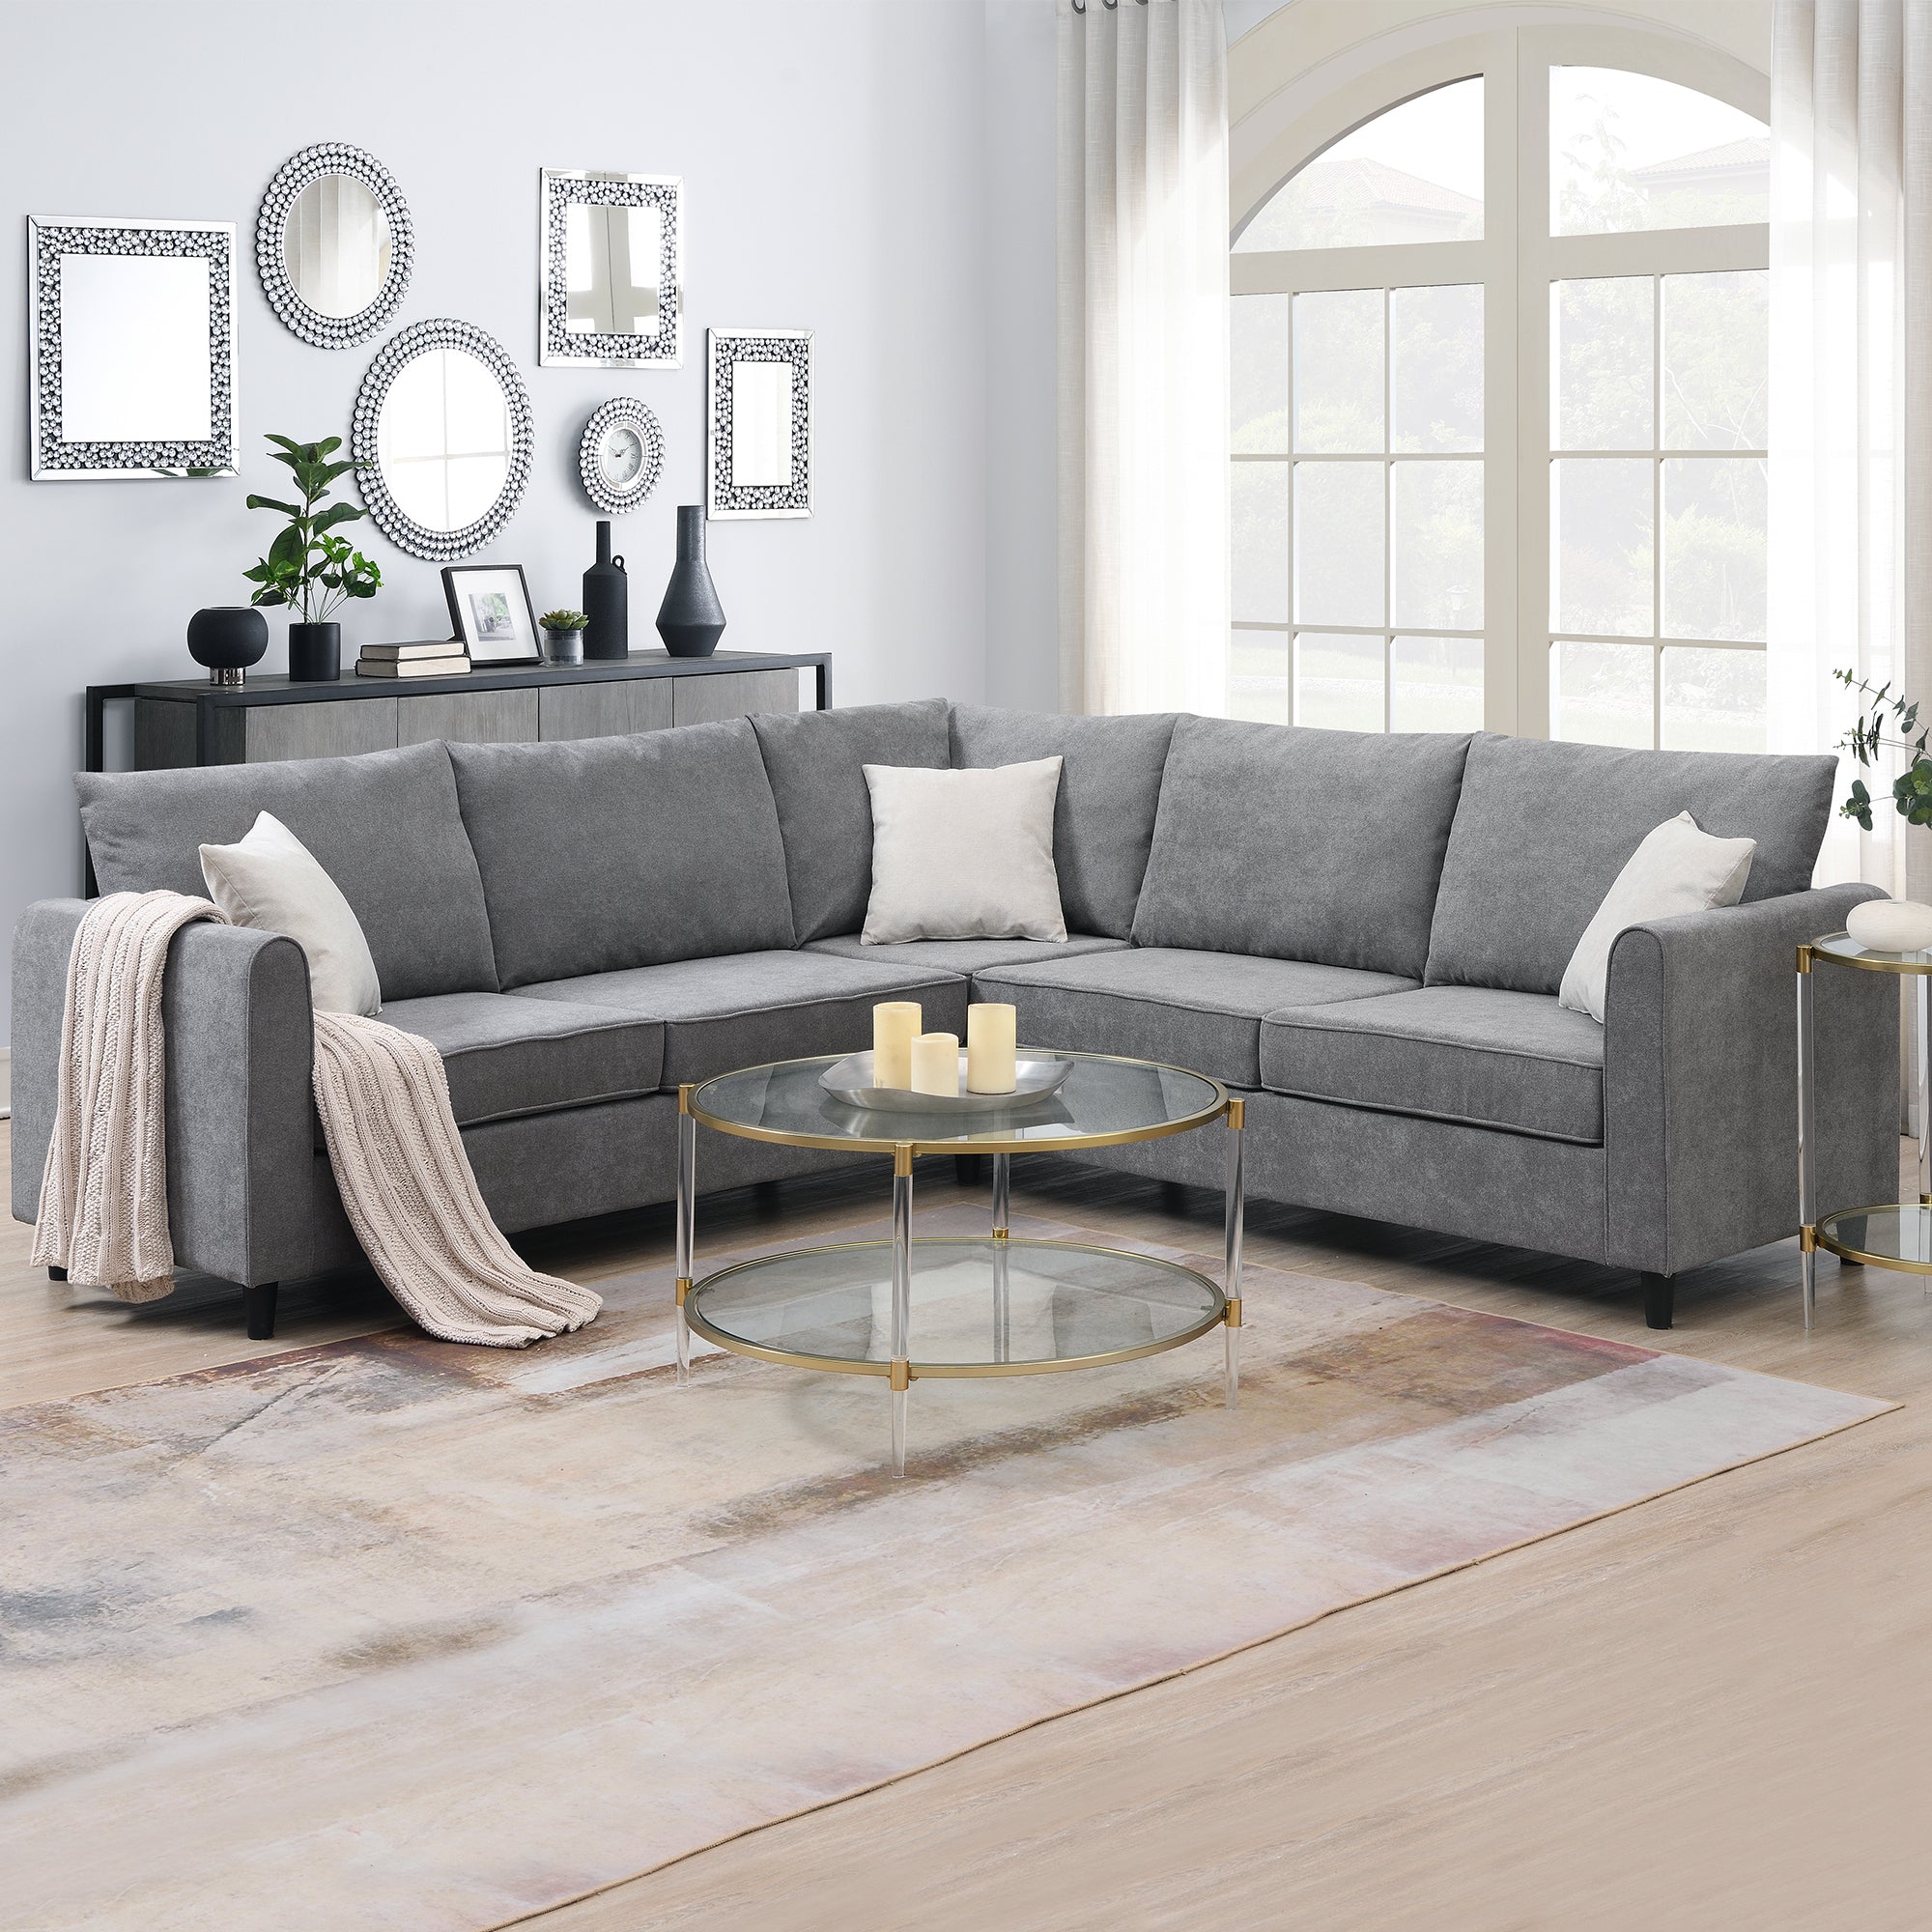 Upholstered Gray L-Sectional Sofa - 3 Pillows, Modern-Stationary Sectionals-American Furniture Outlet